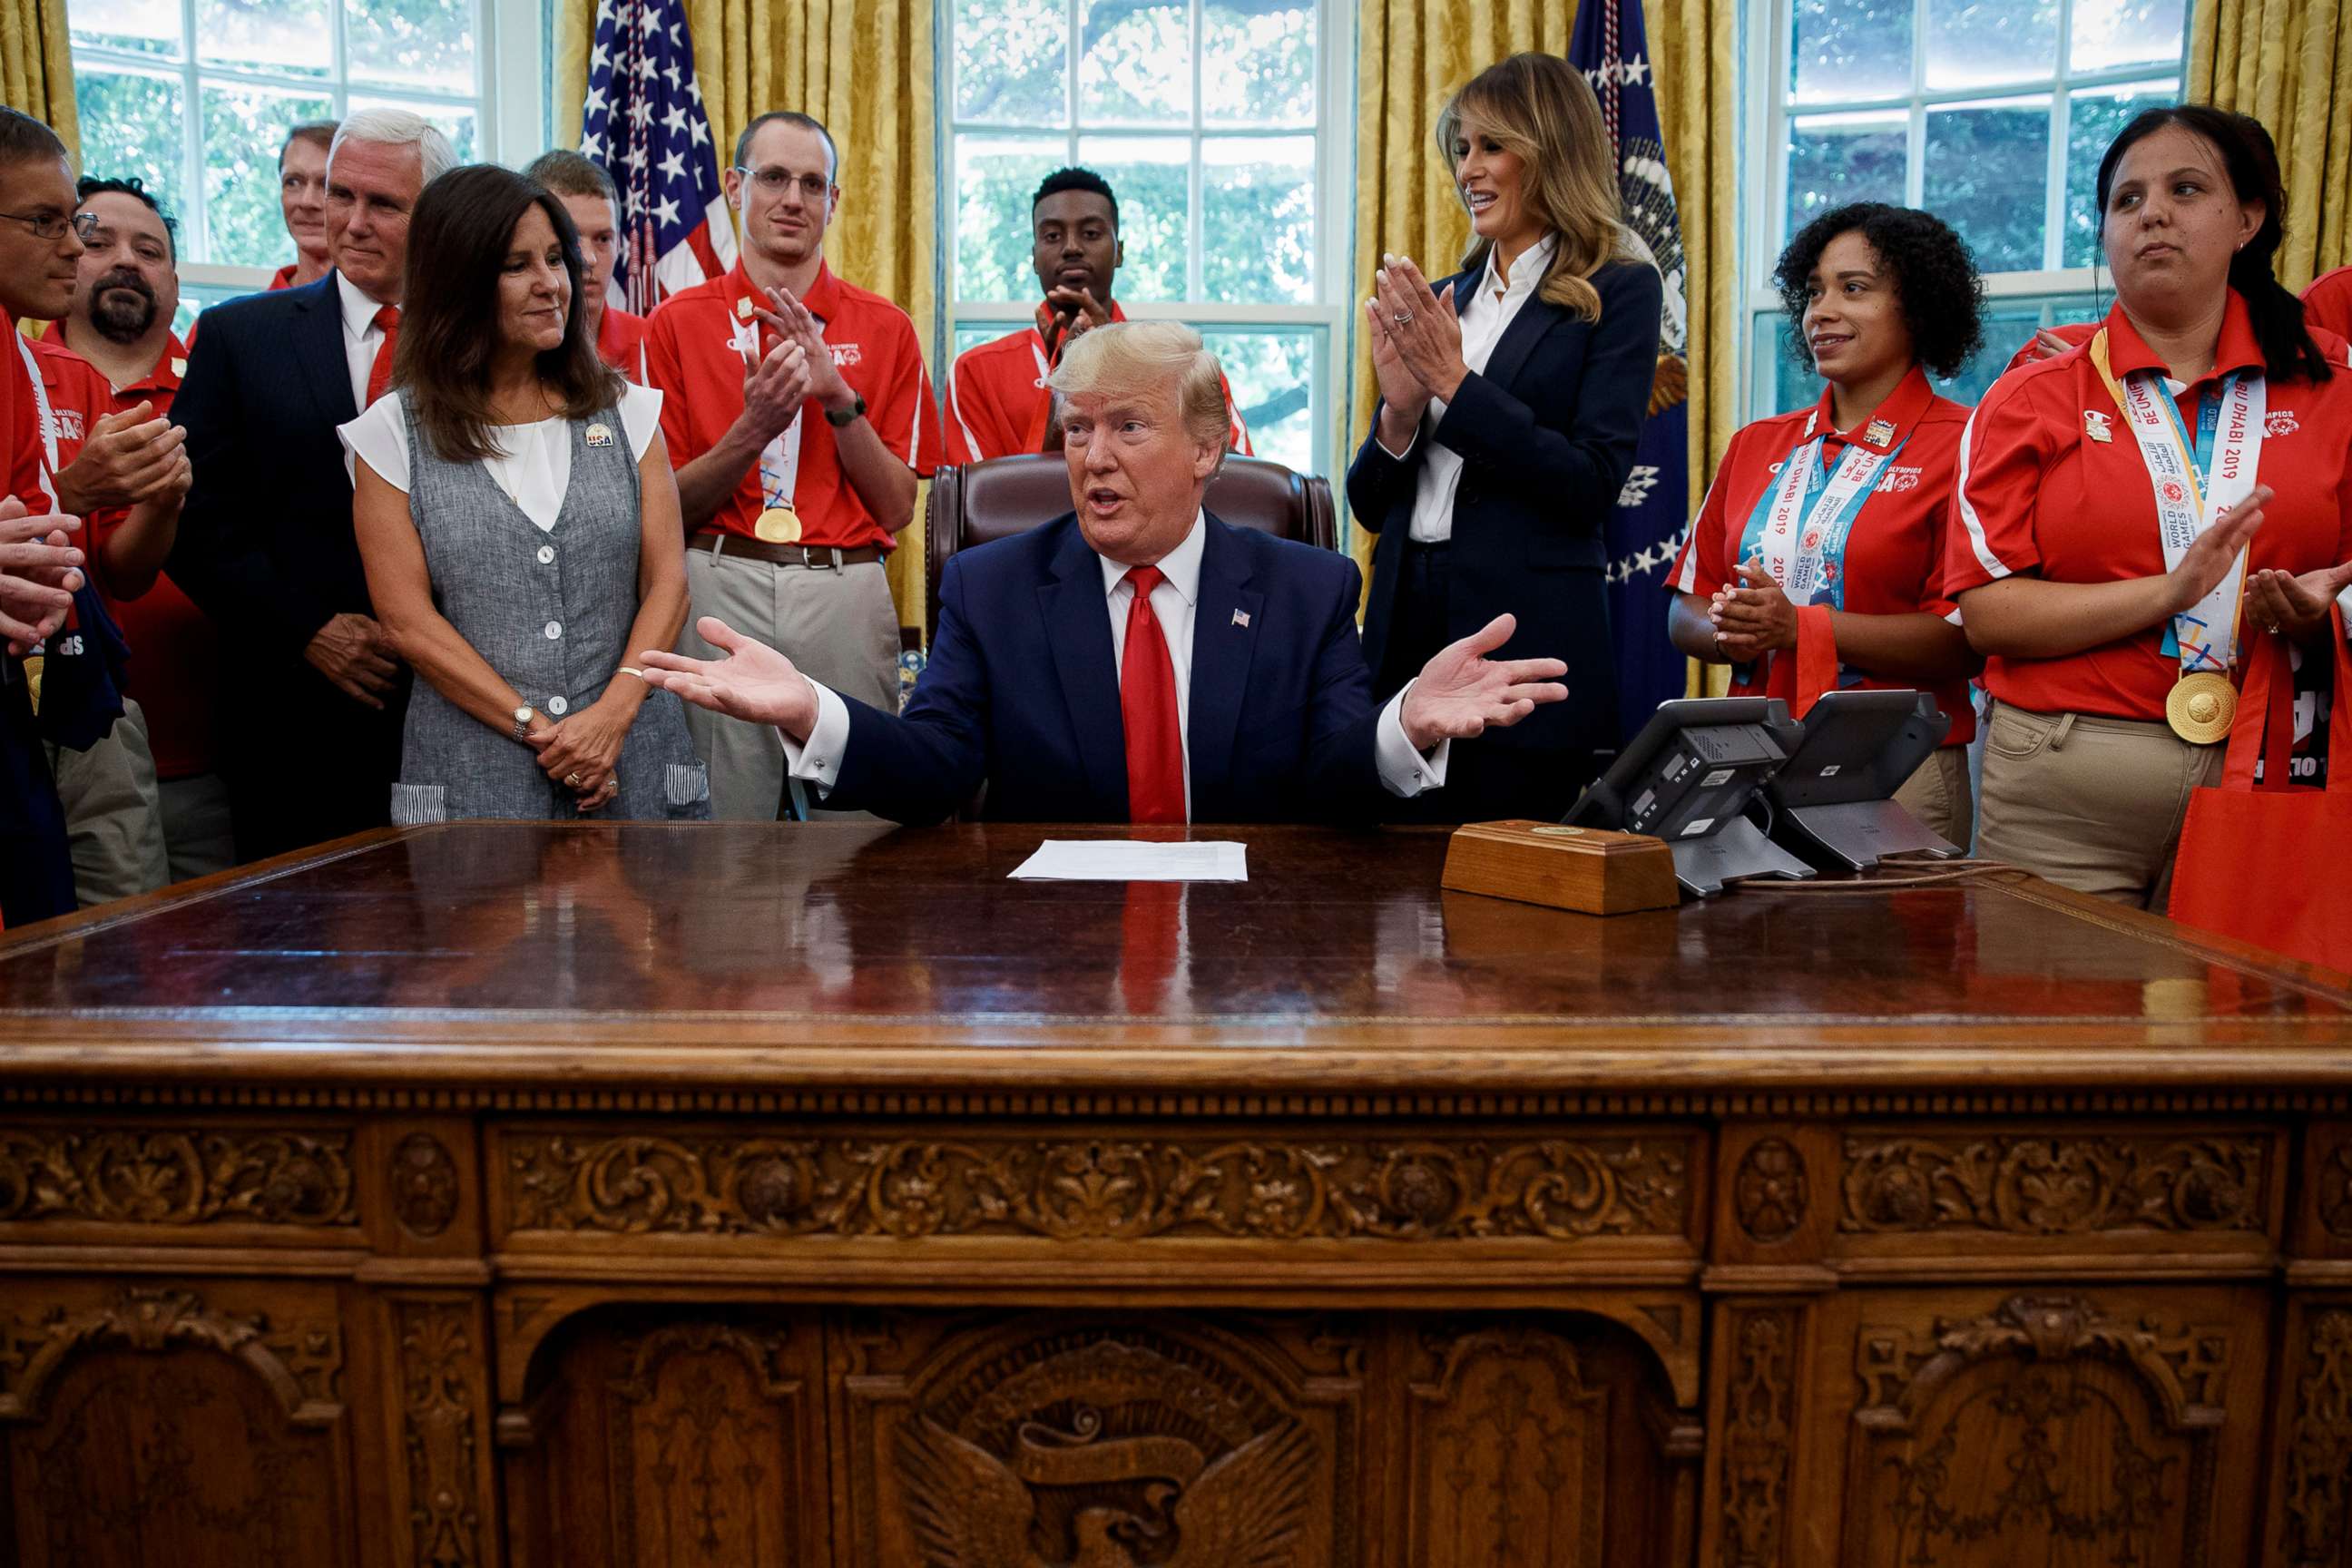 PHOTO: President Donald Trump, accompanied by Vice President Mike Pence, Karen Pence, and first lady Melania Trump, speaks during a photo opportunity with Special Olympics athletes and staff, in the Oval Office, July 18, 2019.